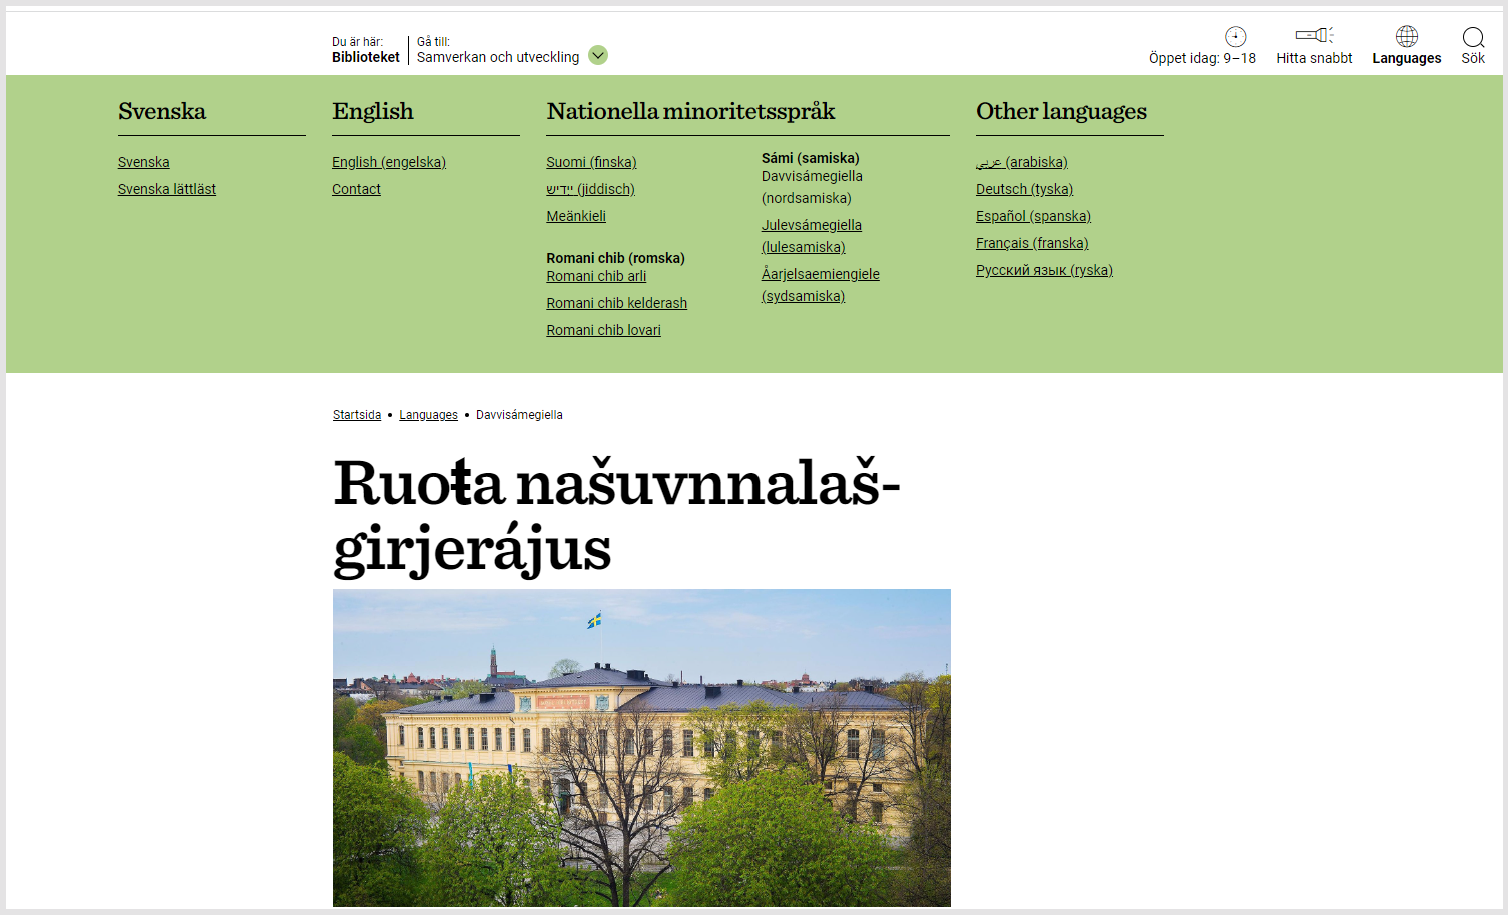 Font choices, values and ecosystem, with some national library examples